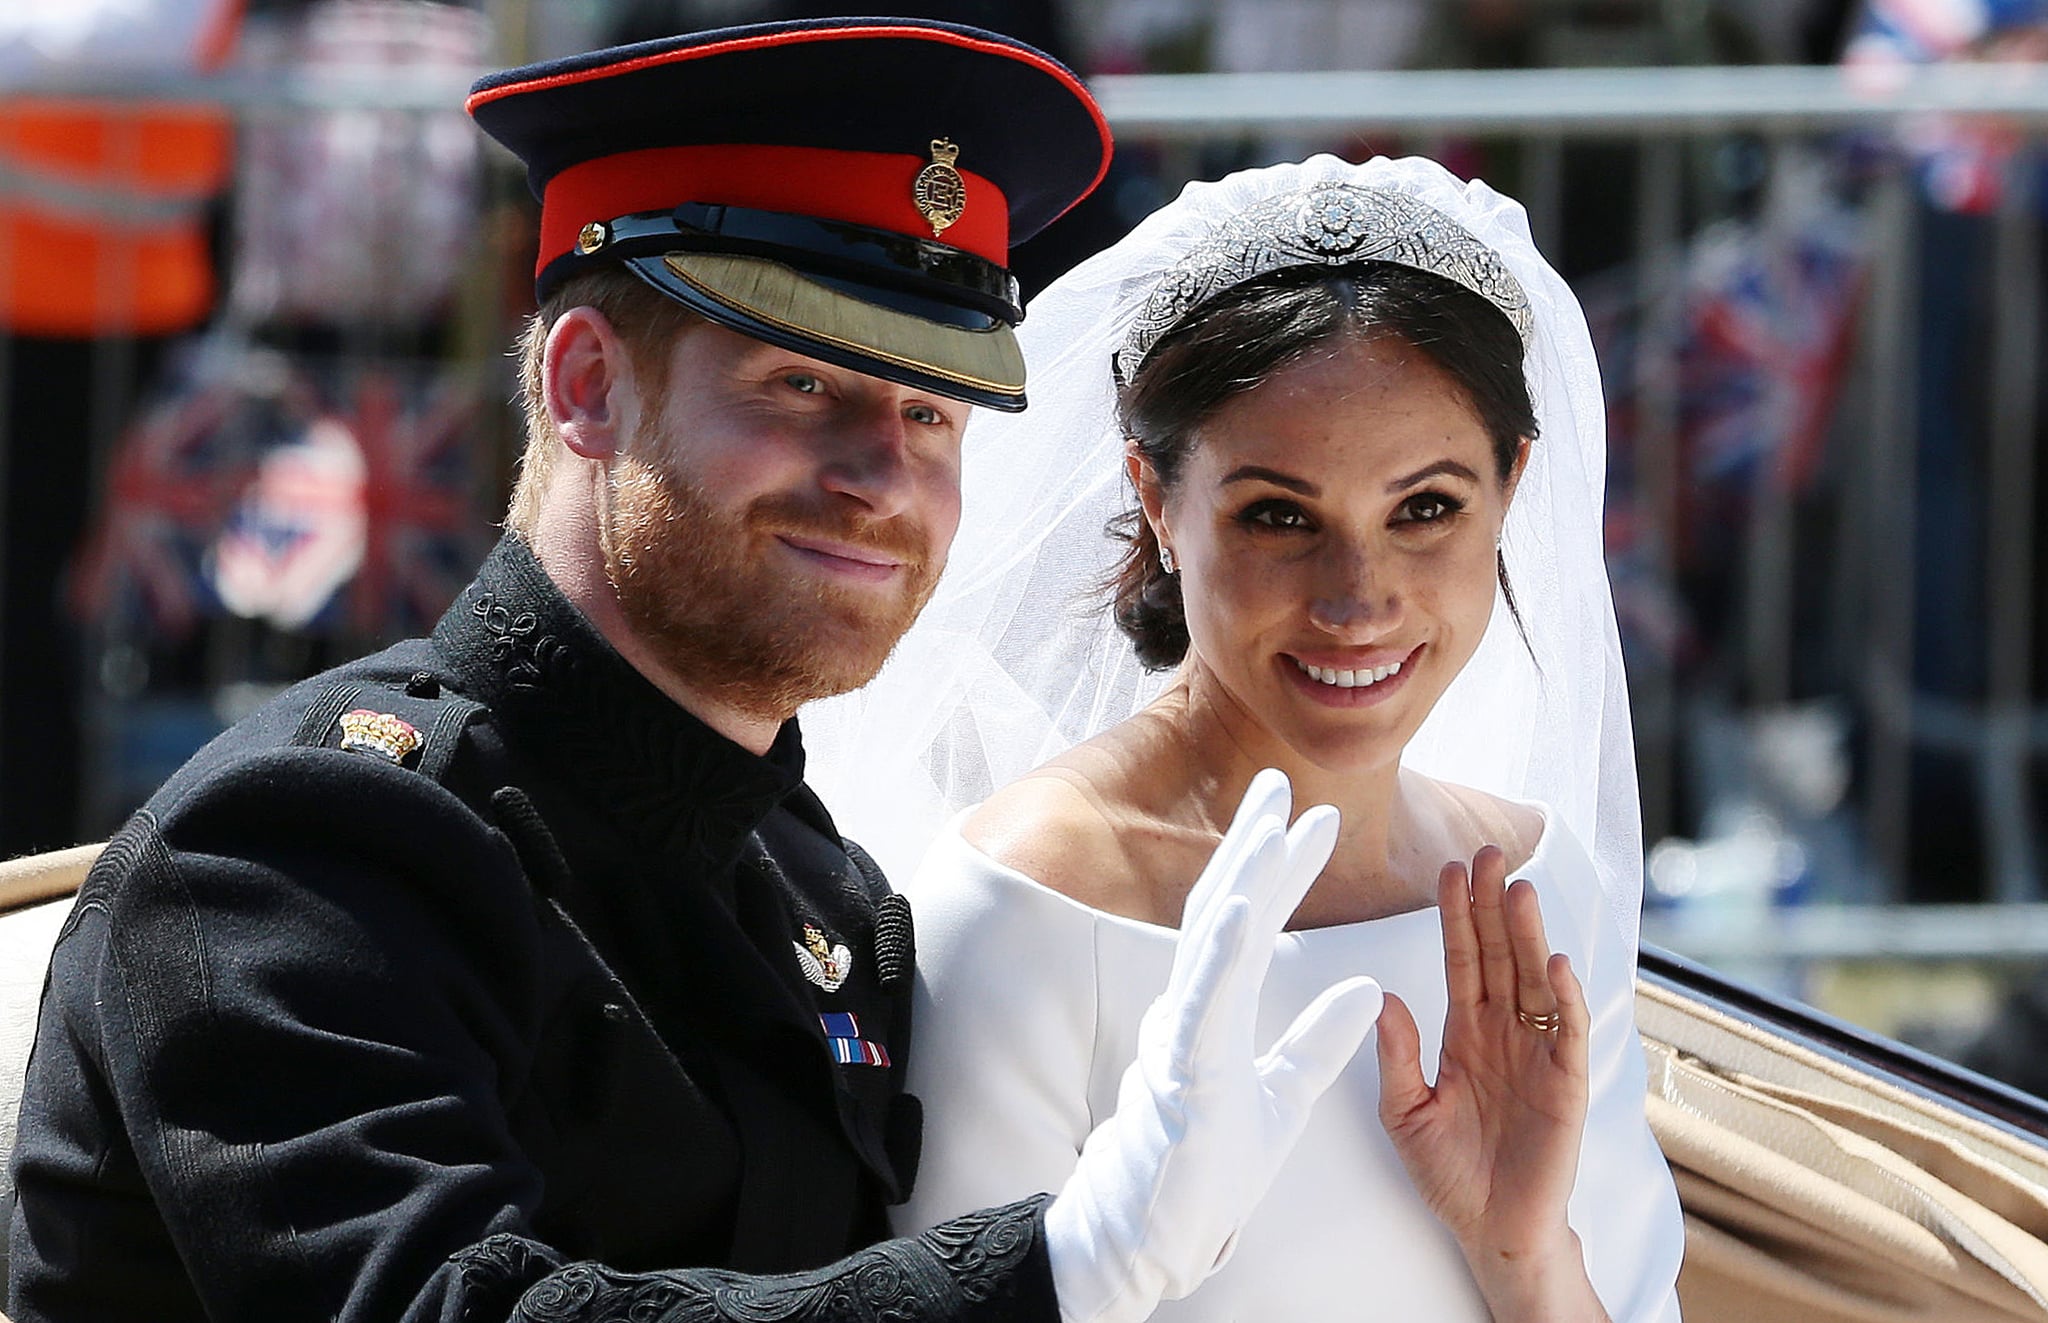 Britain's Prince Harry, Duke of Sussex and his wife Meghan, Duchess of Sussex wave from the Ascot Landau Carriage during their carriage procession on the Long Walk as they head back towards Windsor Castle in Windsor, on May 19, 2018 after their wedding ceremony. (Photo by Aaron Chown / POOL / AFP)        (Photo credit should read AARON CHOWN/AFP/Getty Images)